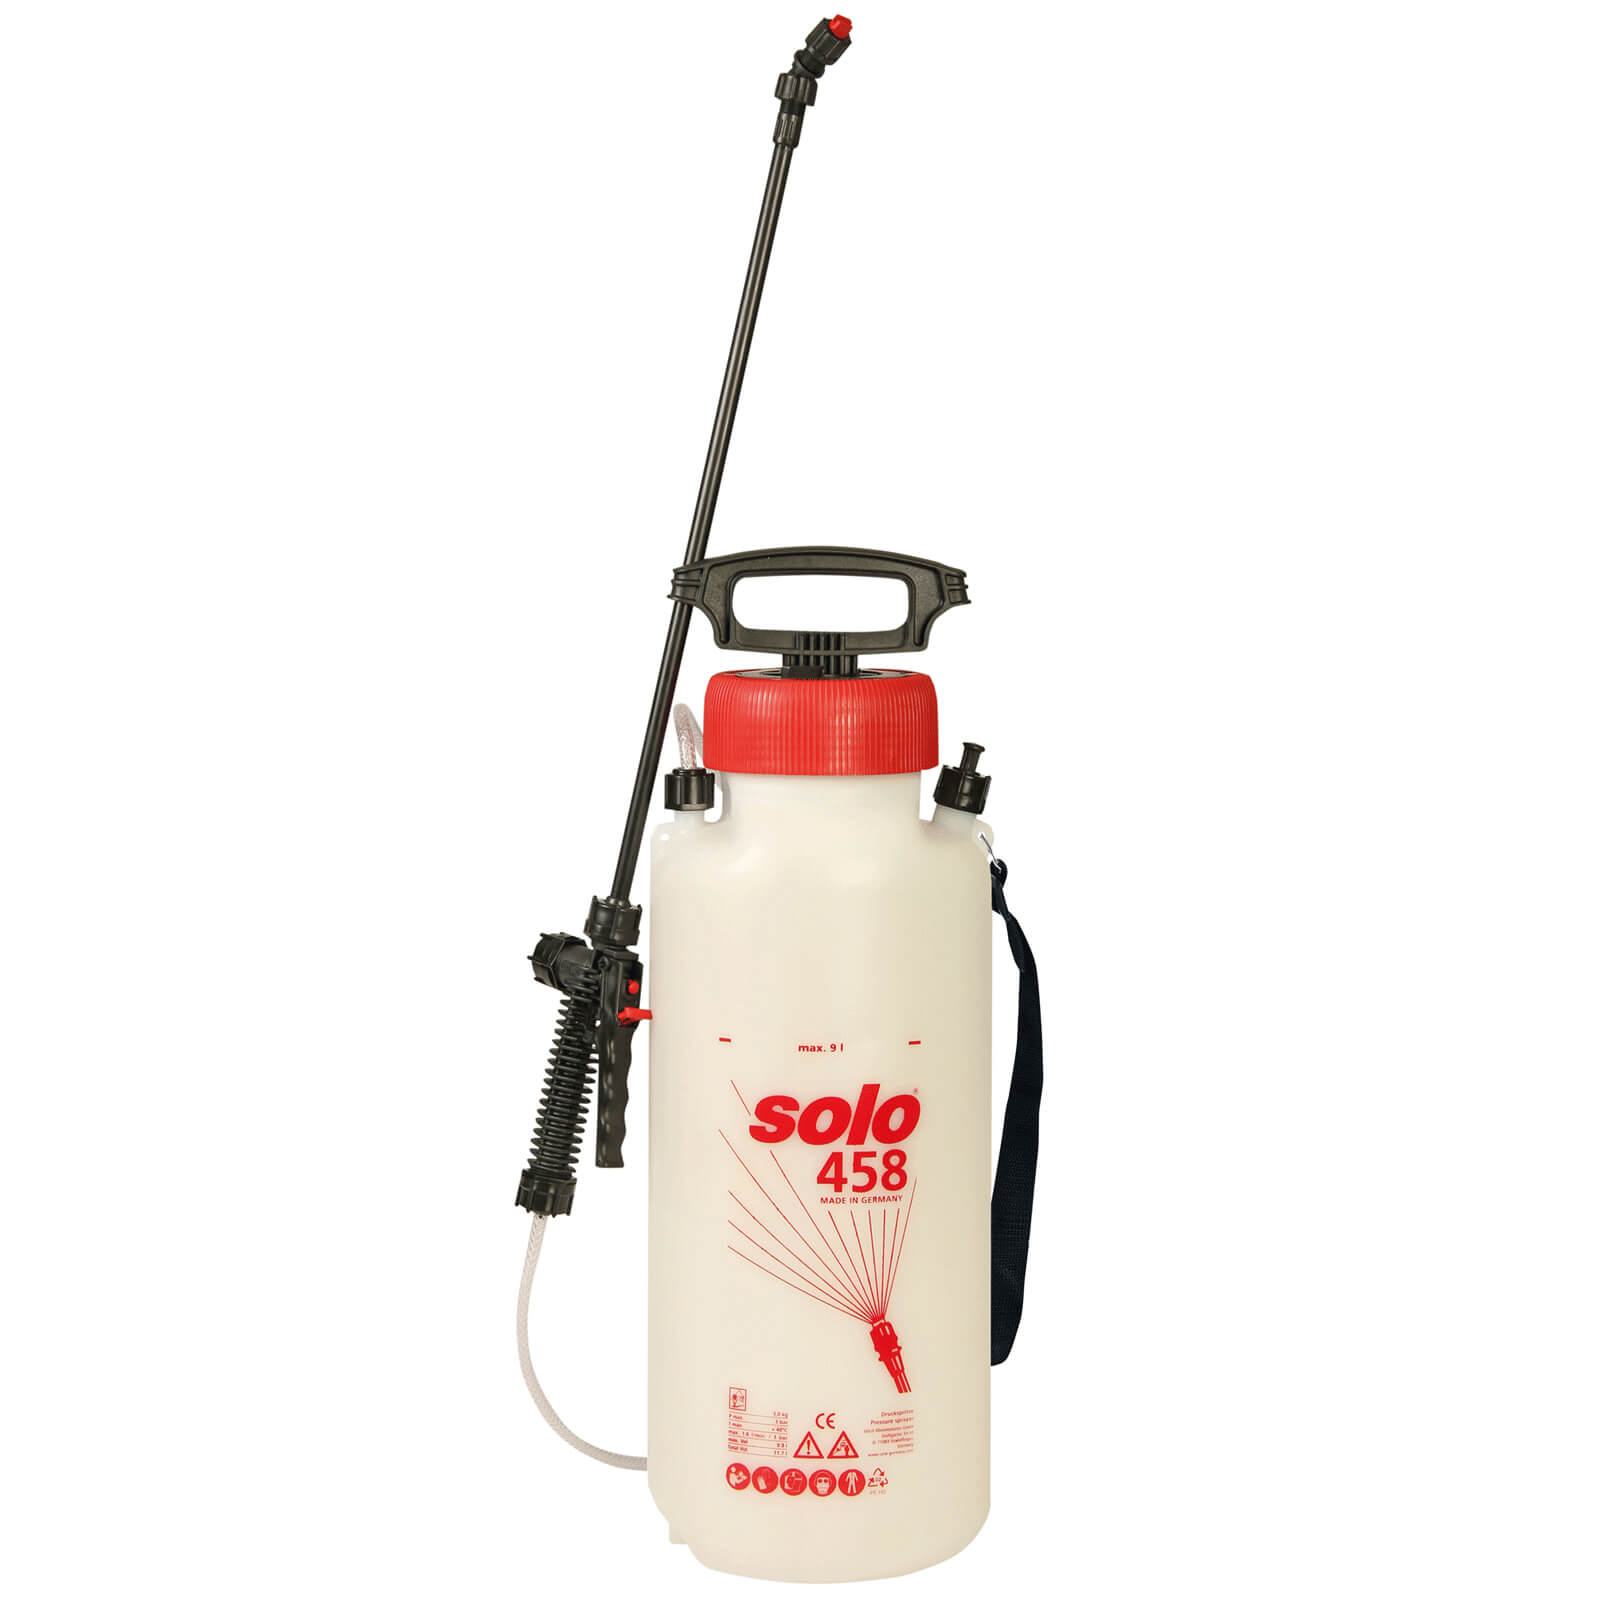 Solo 458 Chemical and Water Pressure Sprayer 9L 9l